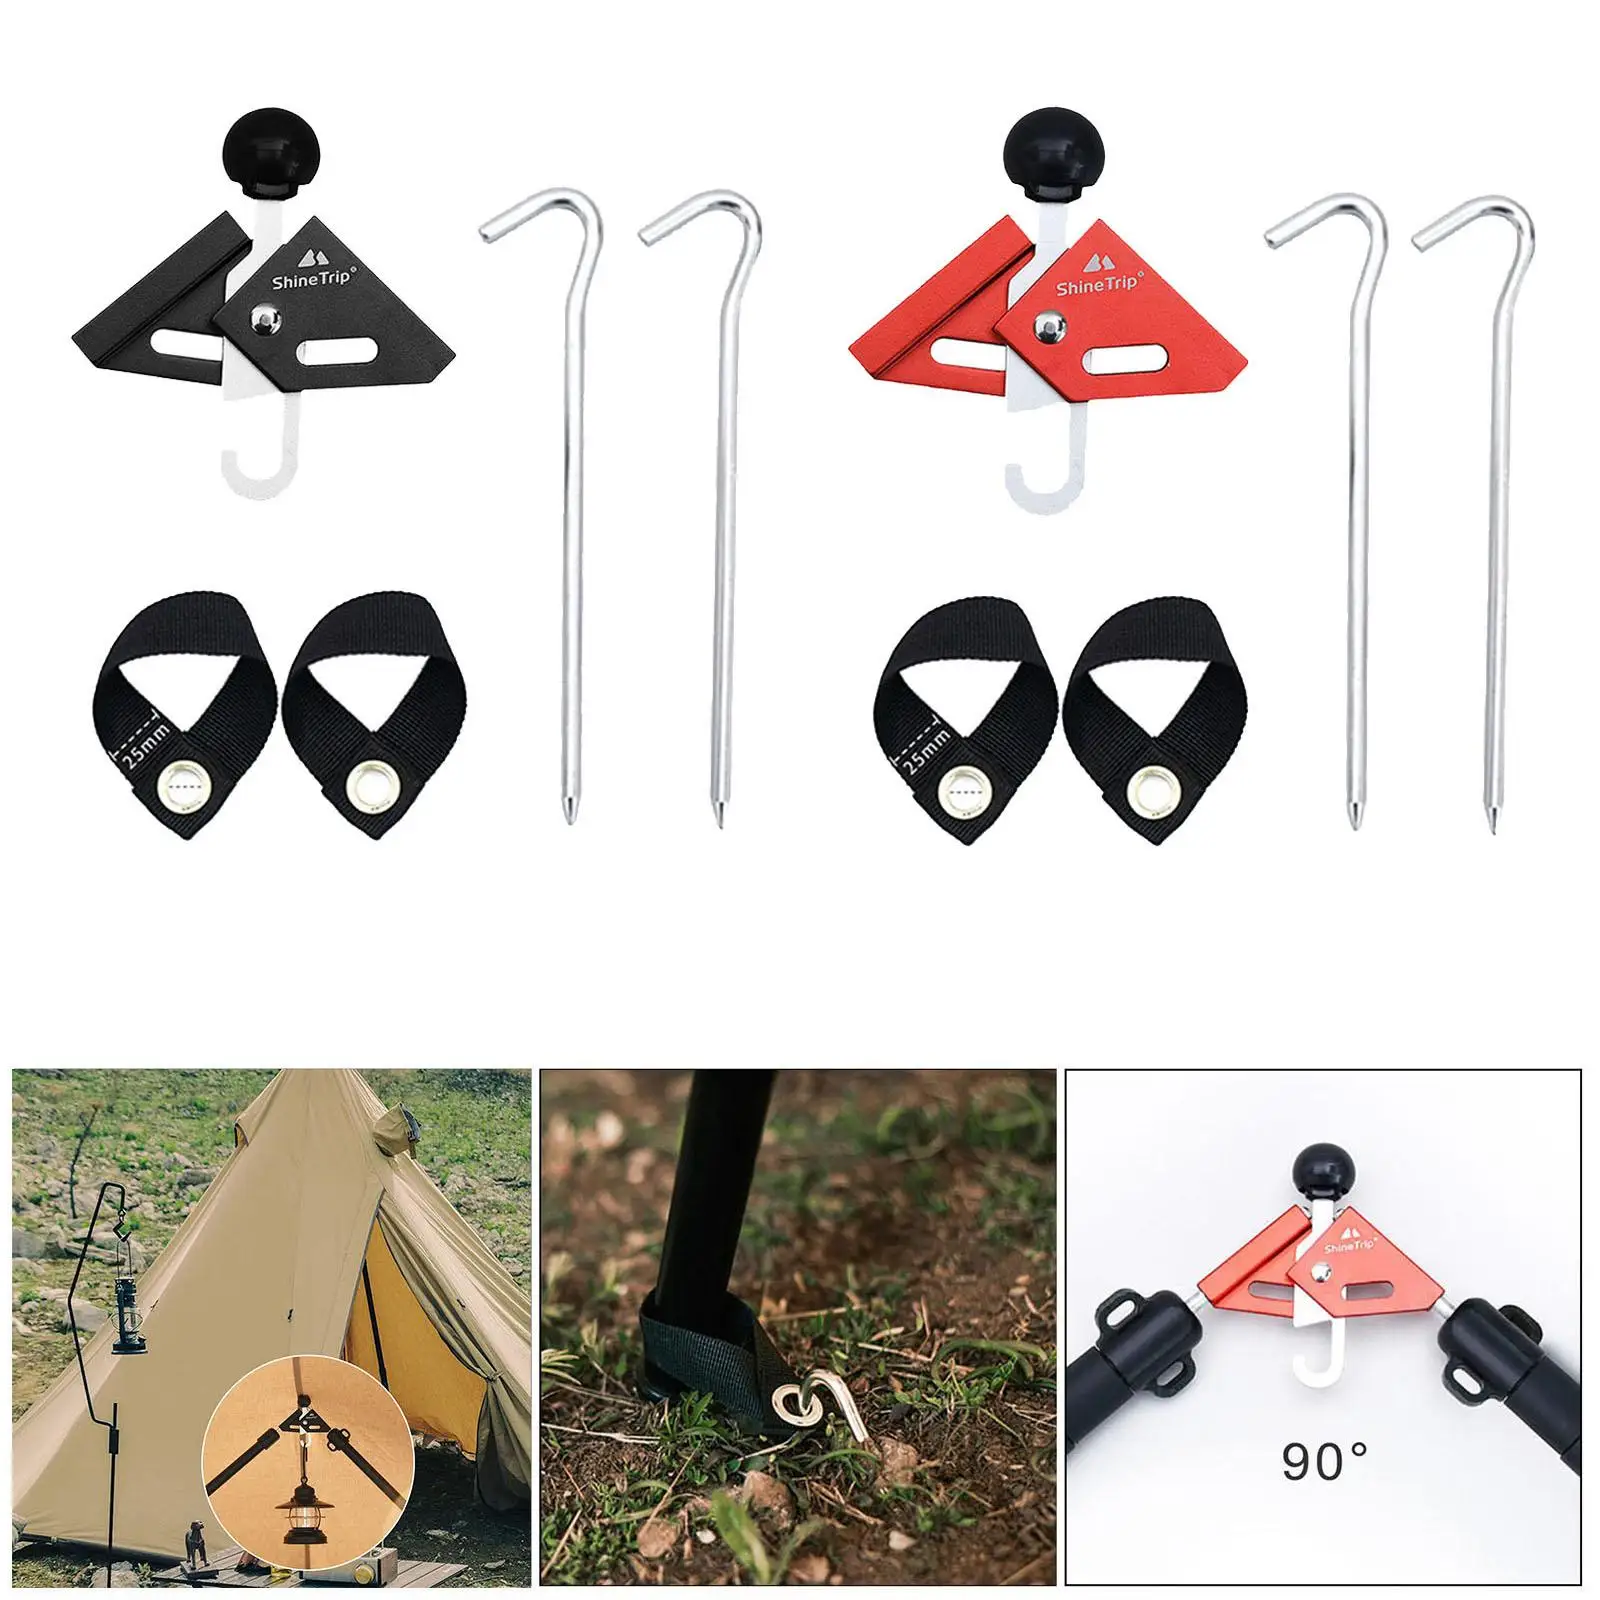 Aluminum Alloy 90 Degree Tarp Post Tip Plugs Puncture Proof Ball Tent Construction Pole Connector with Strap